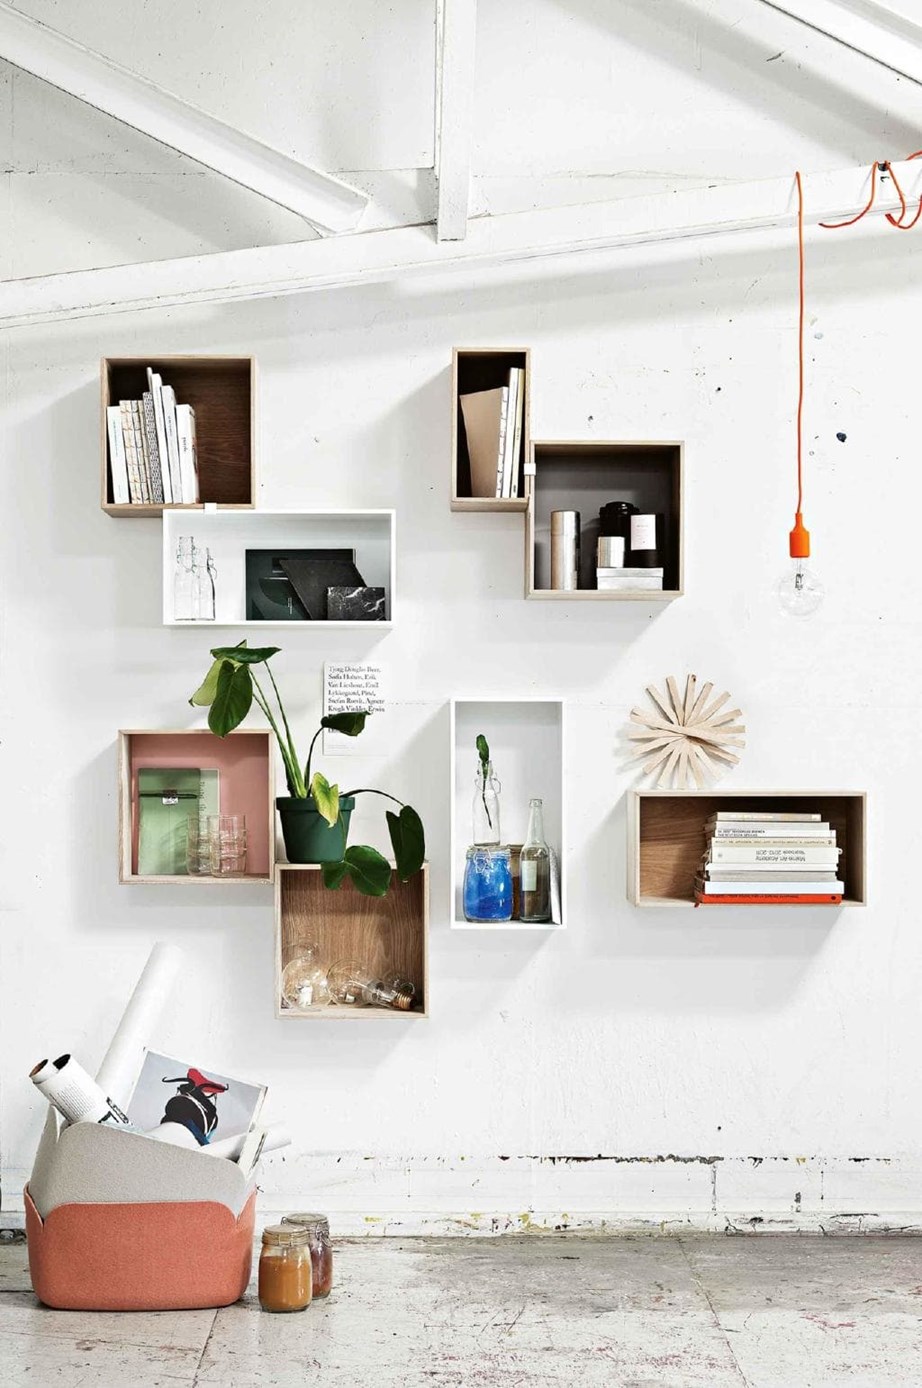 If you create your own storage system, you can adapt the units to suit your apartment. Select a few wall storage units like this to create scenes with objects or artworks, while others can be more functionally used to collect and store items like magazines and books. Add or subtract extra shelves, then snap them into place with the clips provided.

[**SHOP: Muuto Mini Stacked Shelving System, Living Edge**](https://livingedge.com.au/storage/shelving/muuto-mini_stacked_storage_system_2.0/MU-MINISTACK.html?experience=home|target="_blank"|rel="nofollow")